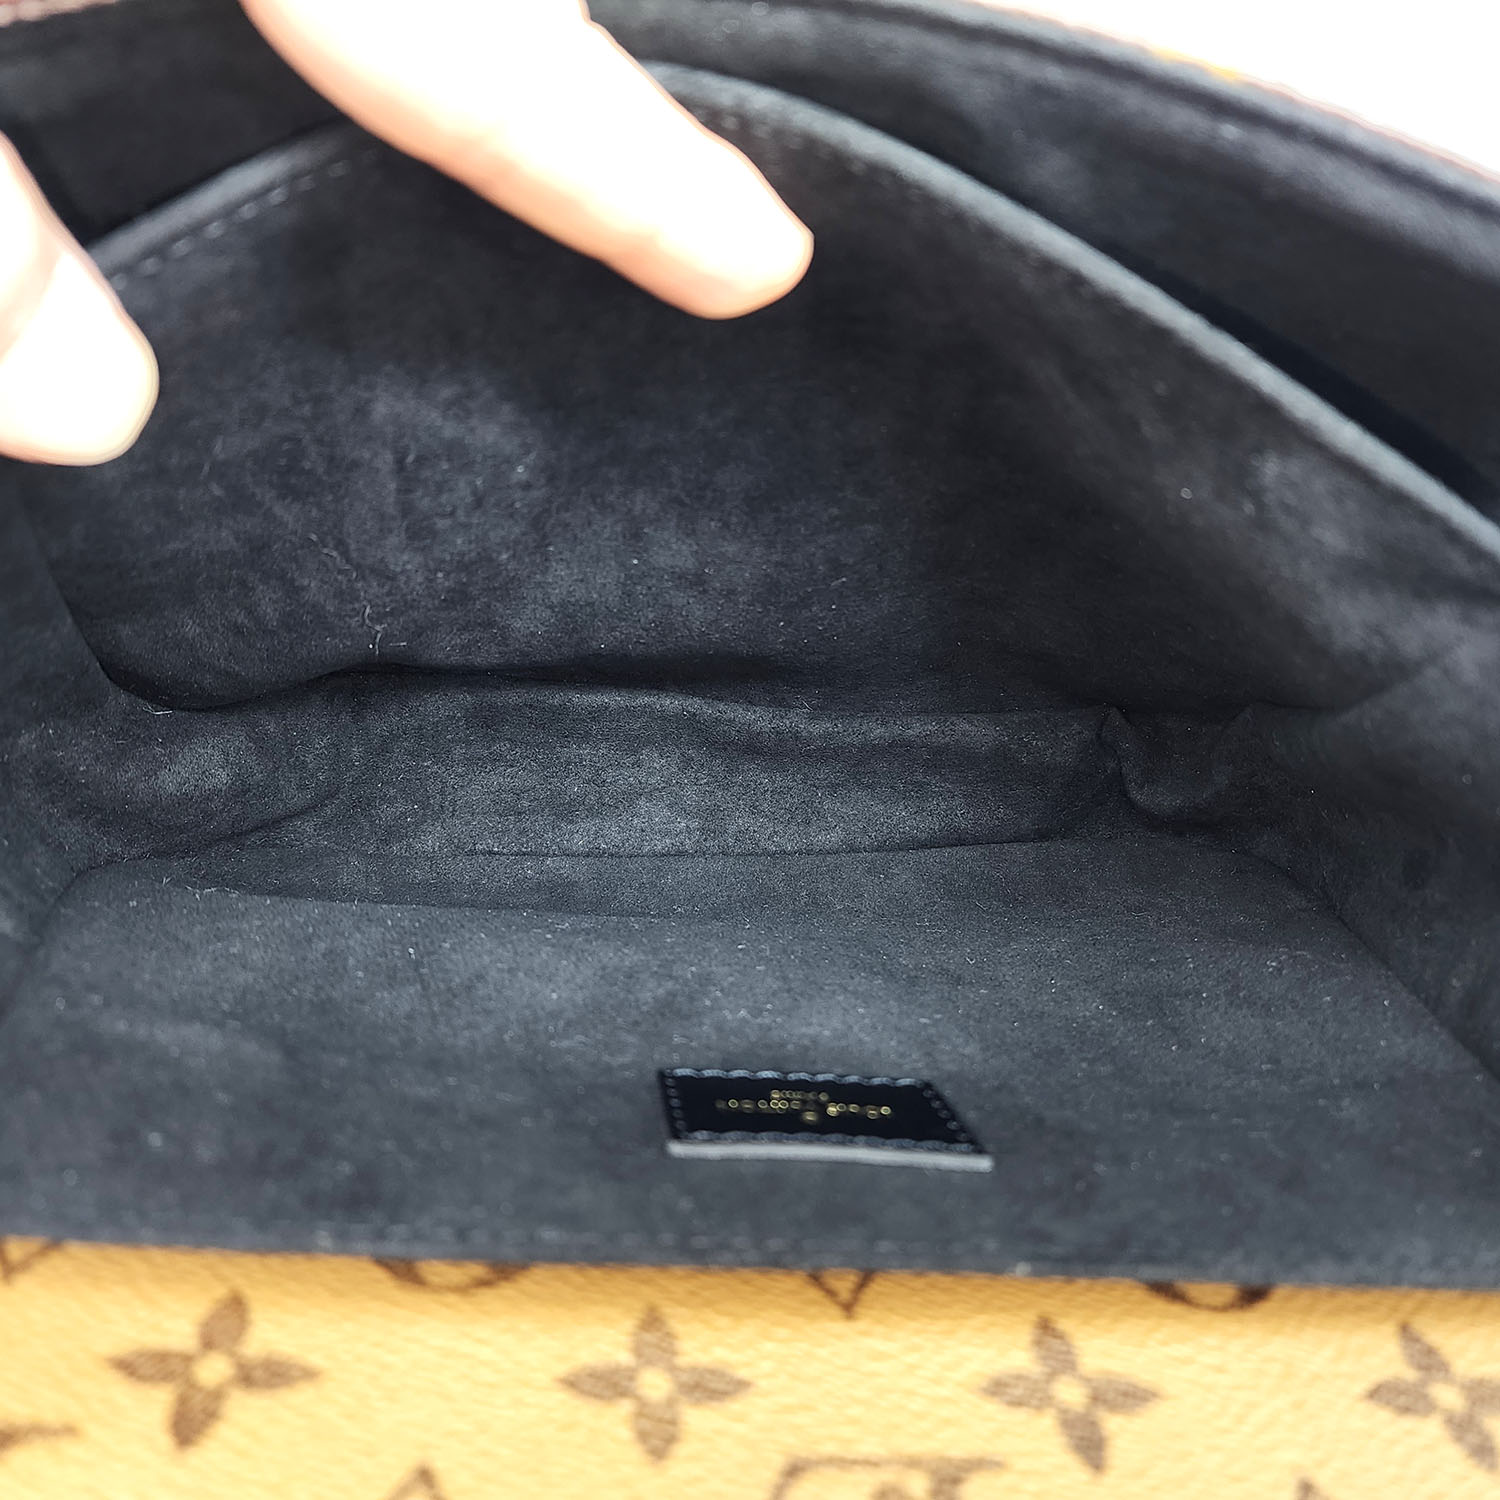 Louis Vuitton Pochette metis reverse for Sale in Daly City, CA